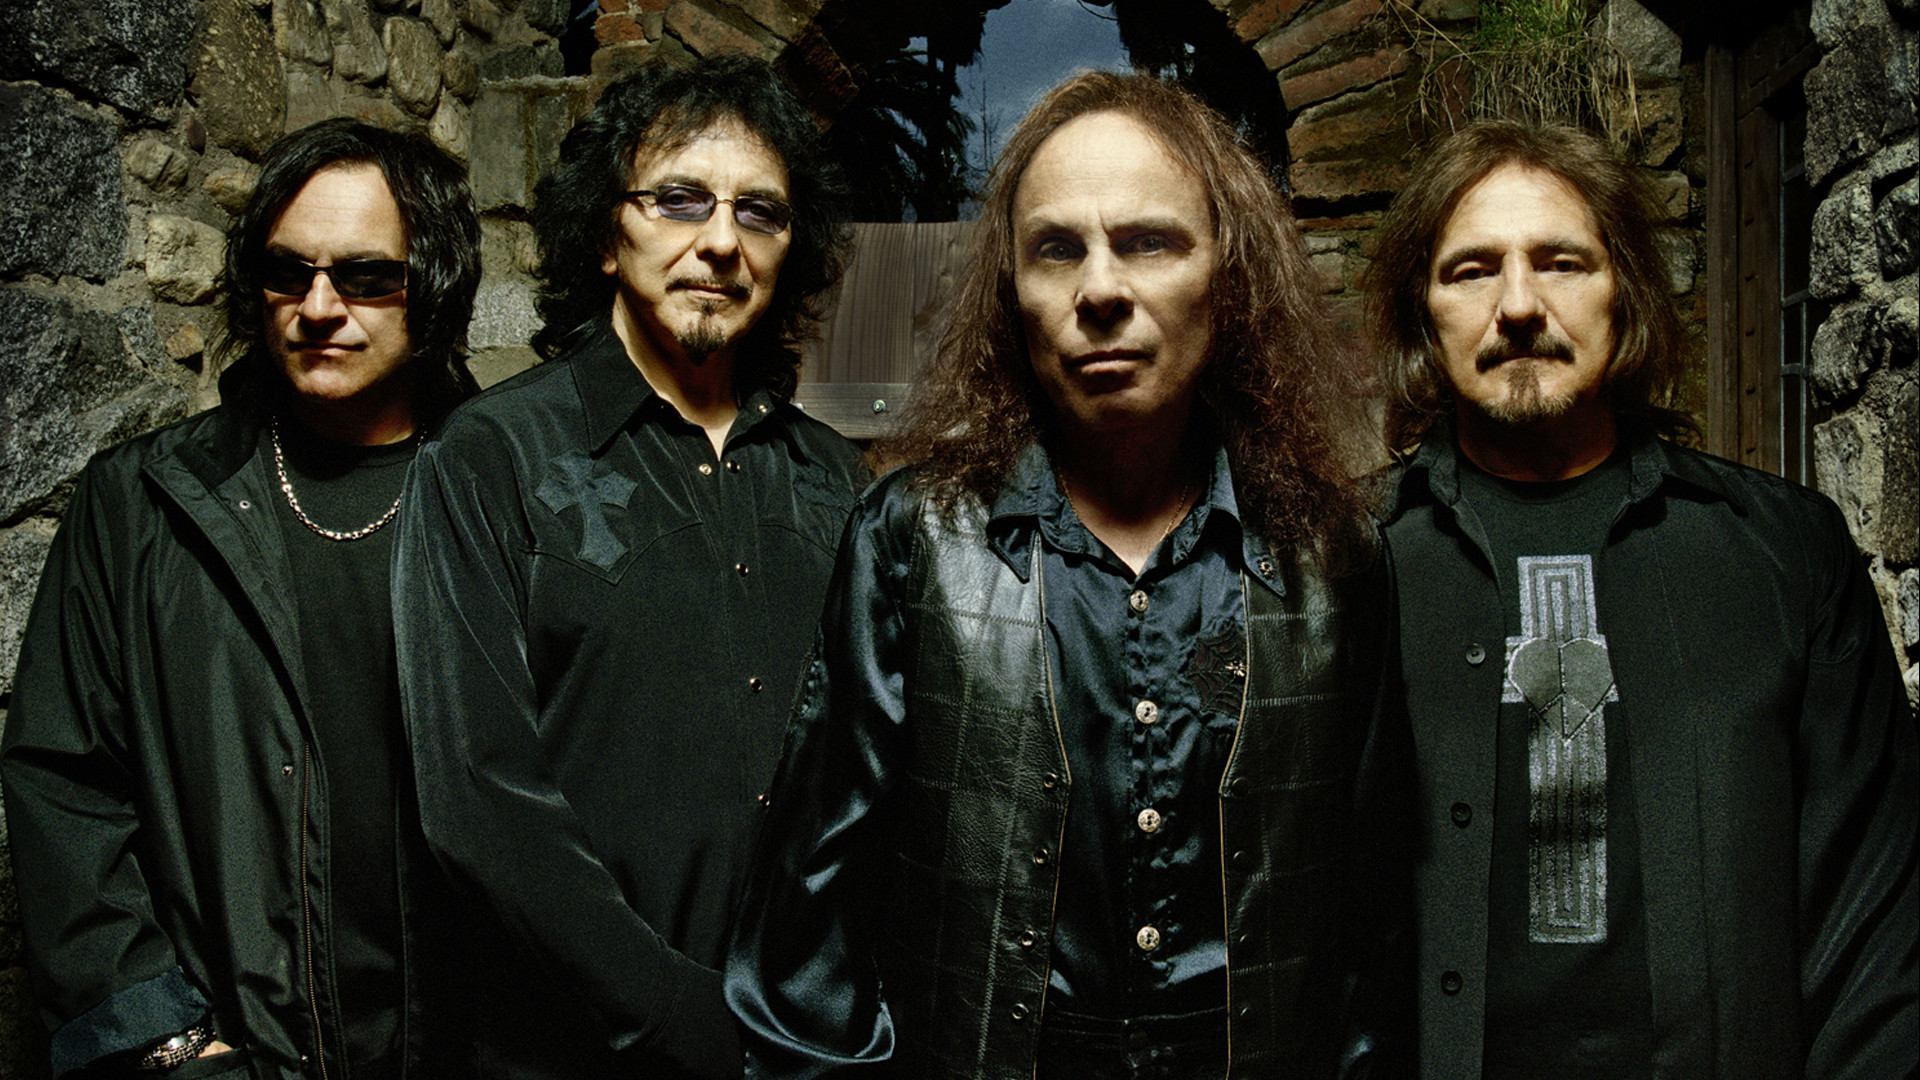 1920x1080 47 Black Sabbath HD Wallpapers | Backgrounds - Wallpaper Abyss - Page 2